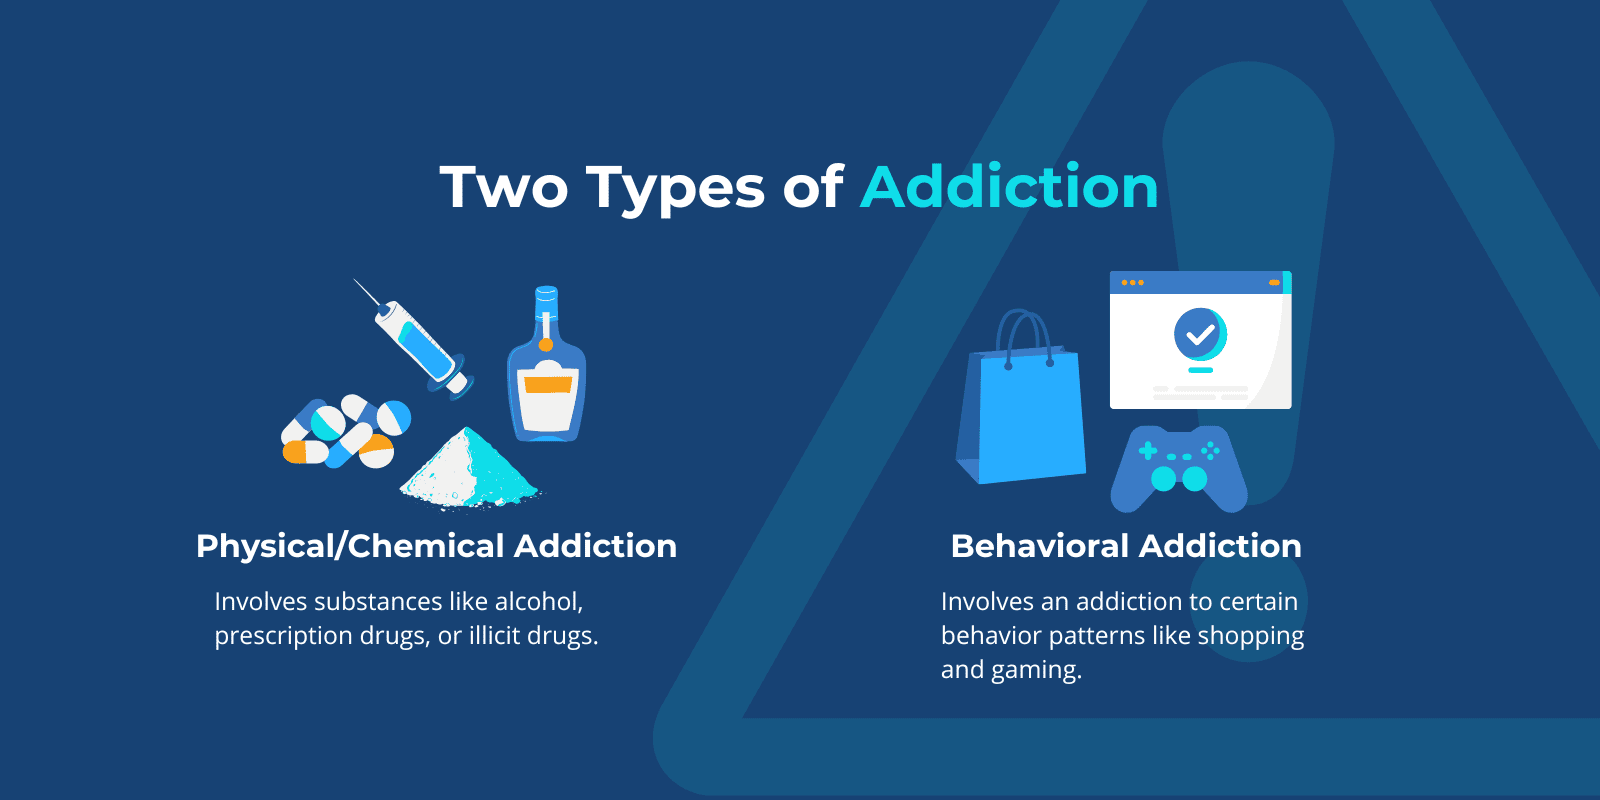 Chemical and Behavioral Addiction represented with relevant icons